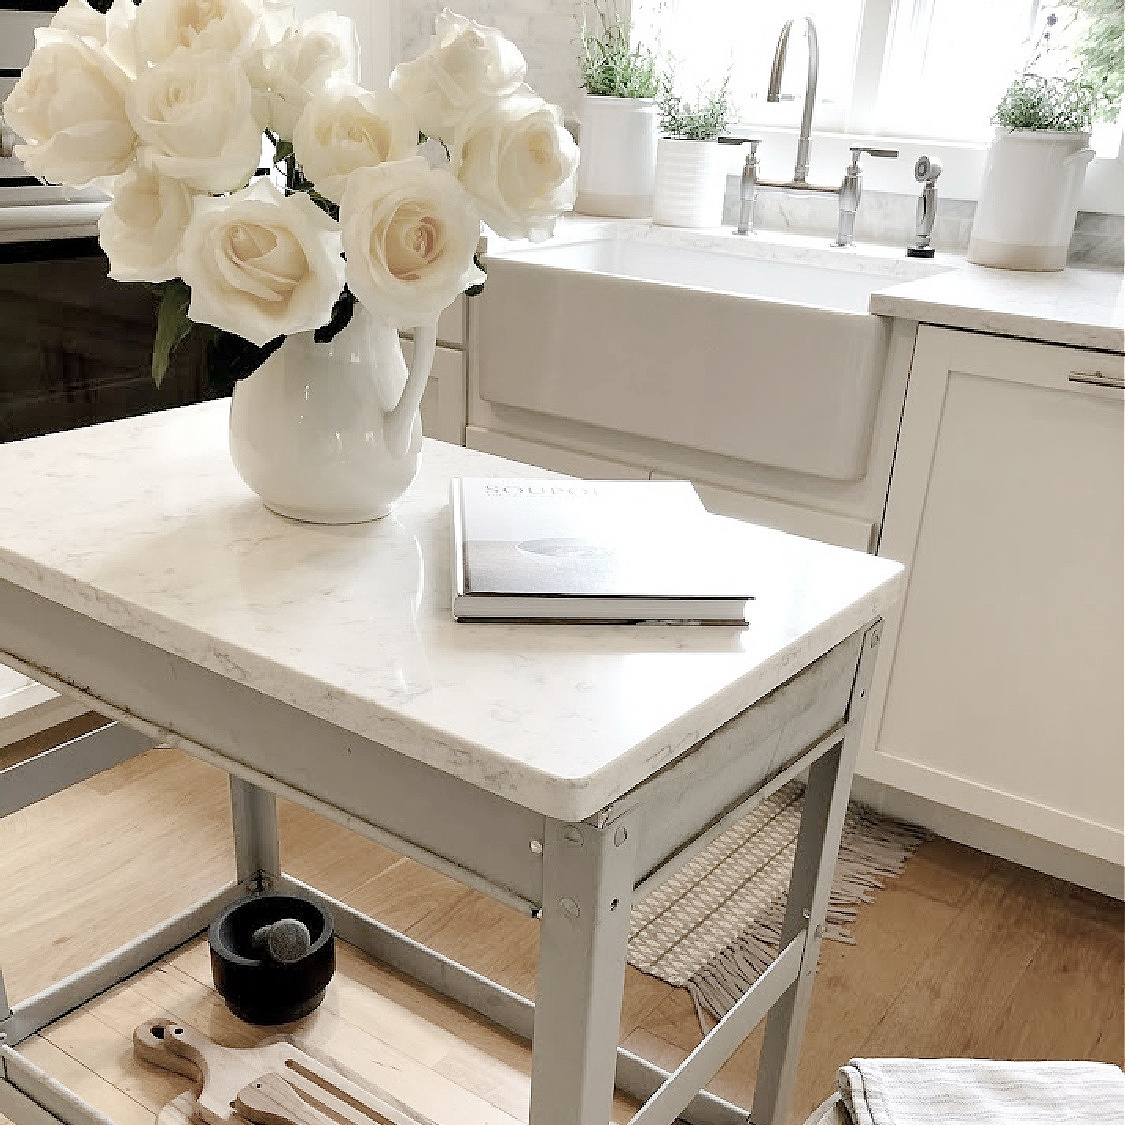 Minuet quartz topped industrial cart in my kitchen with white roses in pitcher - Hello Lovely Studio. #modernfrench #minuetquartz